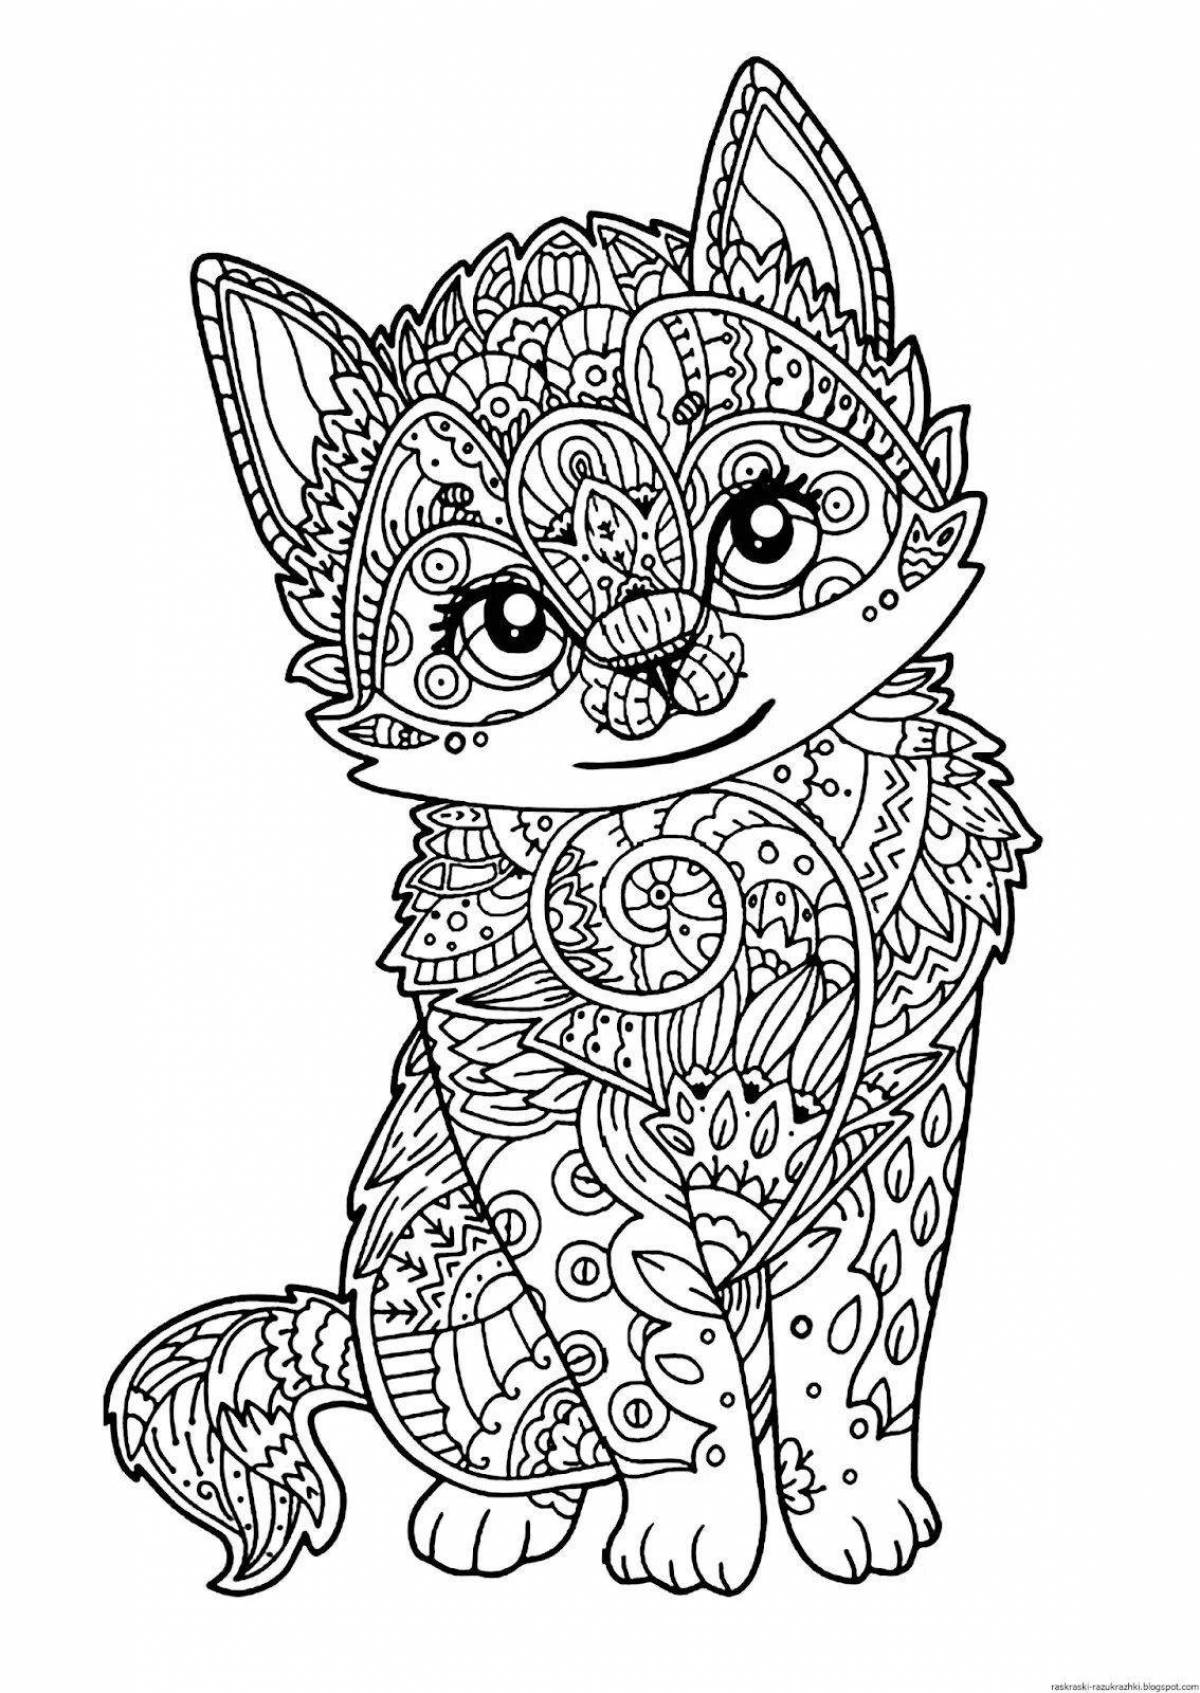 Delightful coloring for girls 10 years old - very beautiful animals